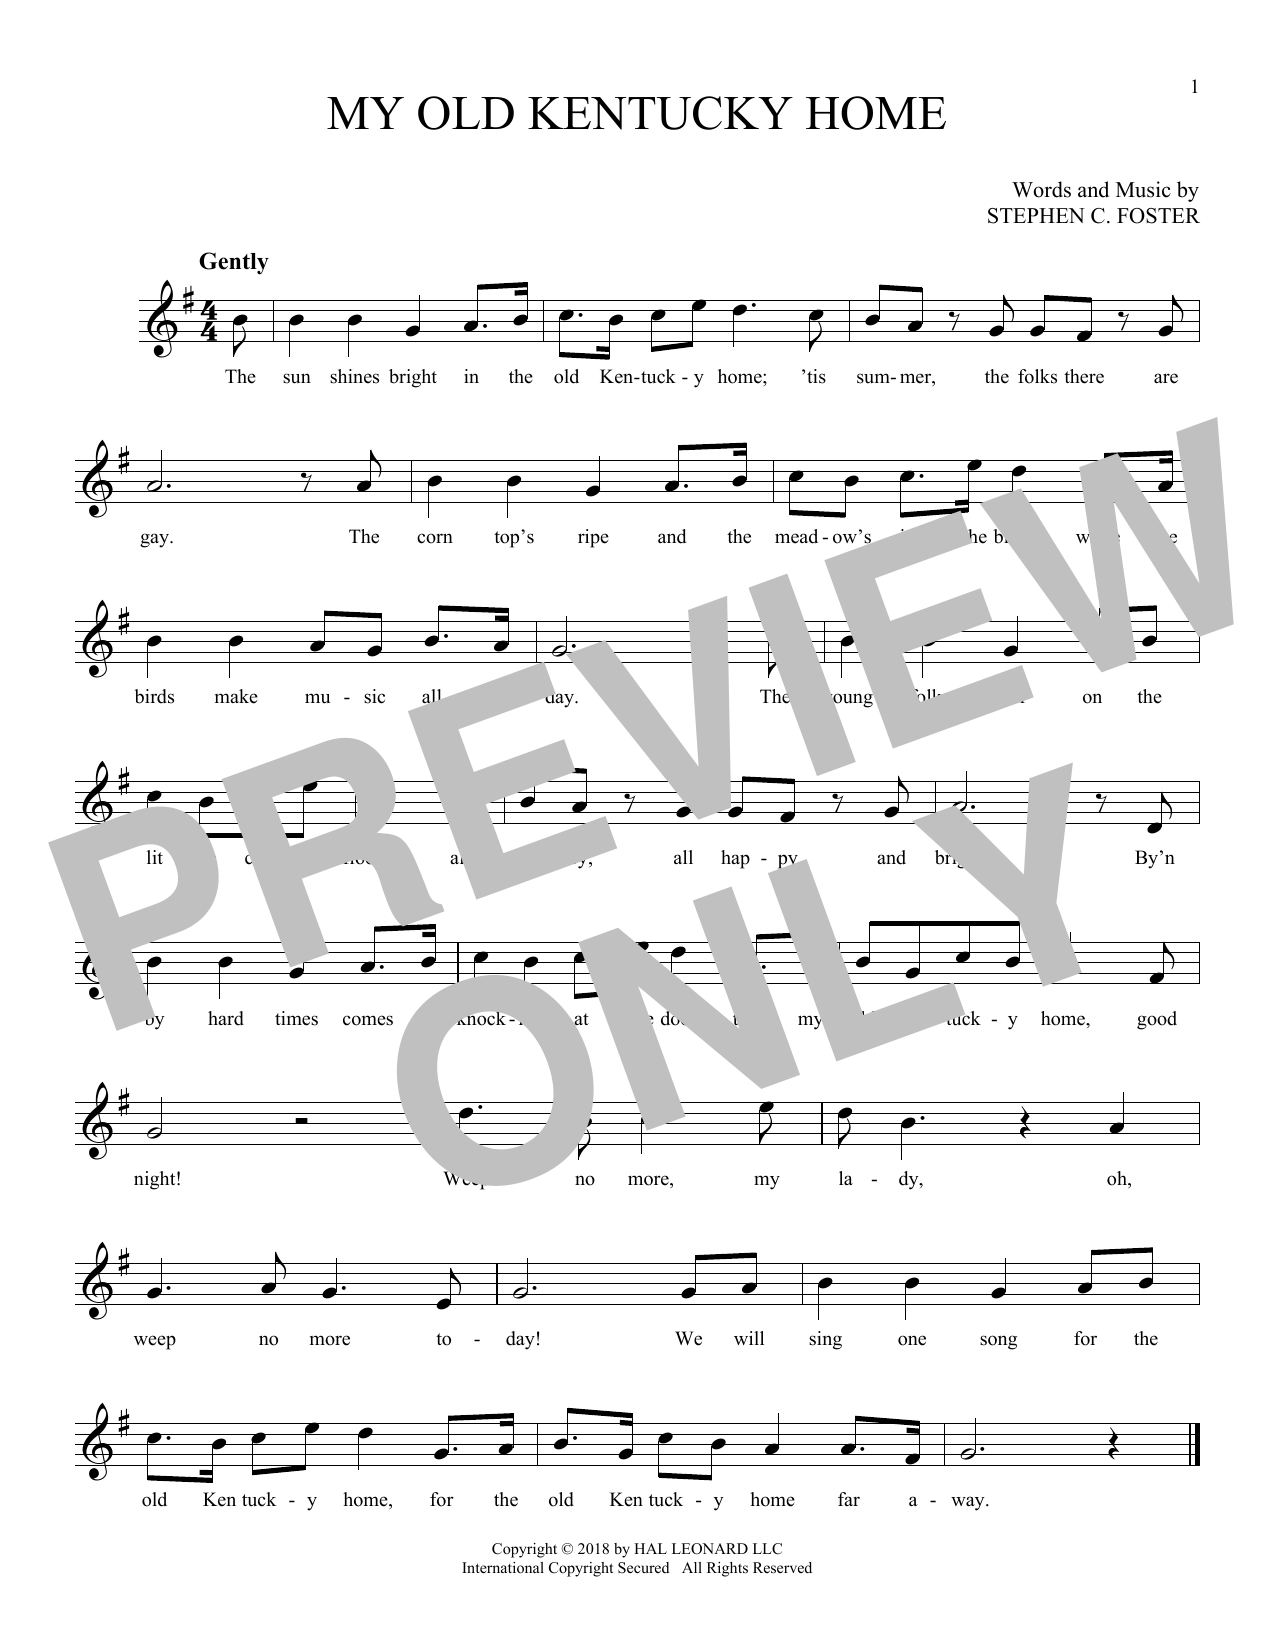 Stephen C. Foster "My Old Kentucky Home" Sheet Music Notes Download